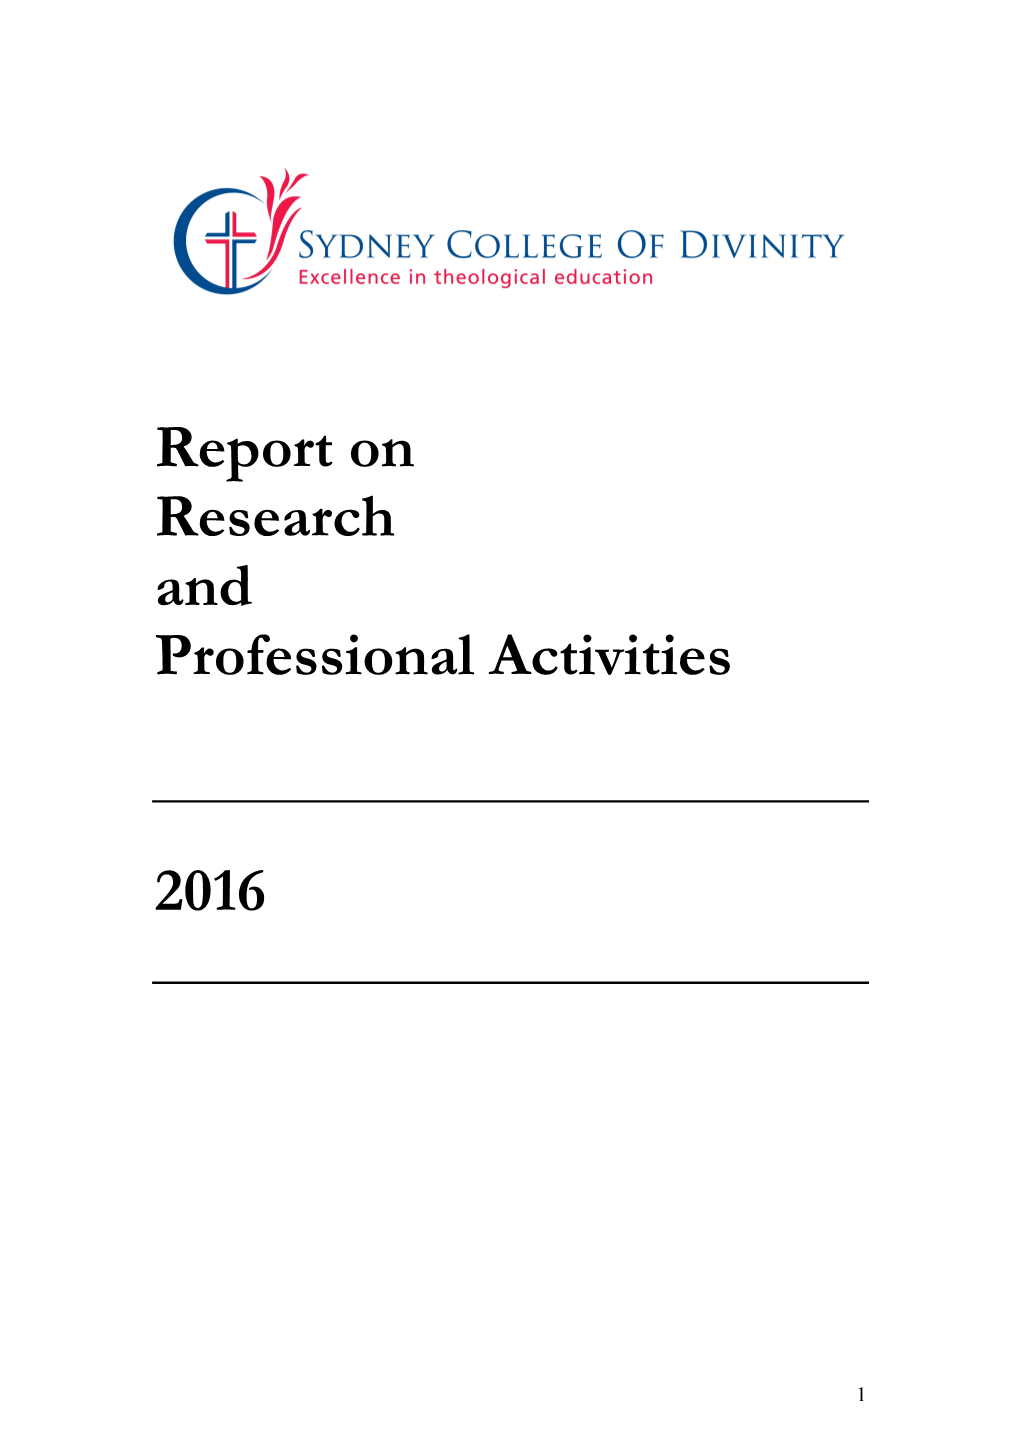 Report on Research and Professional Activities 2016